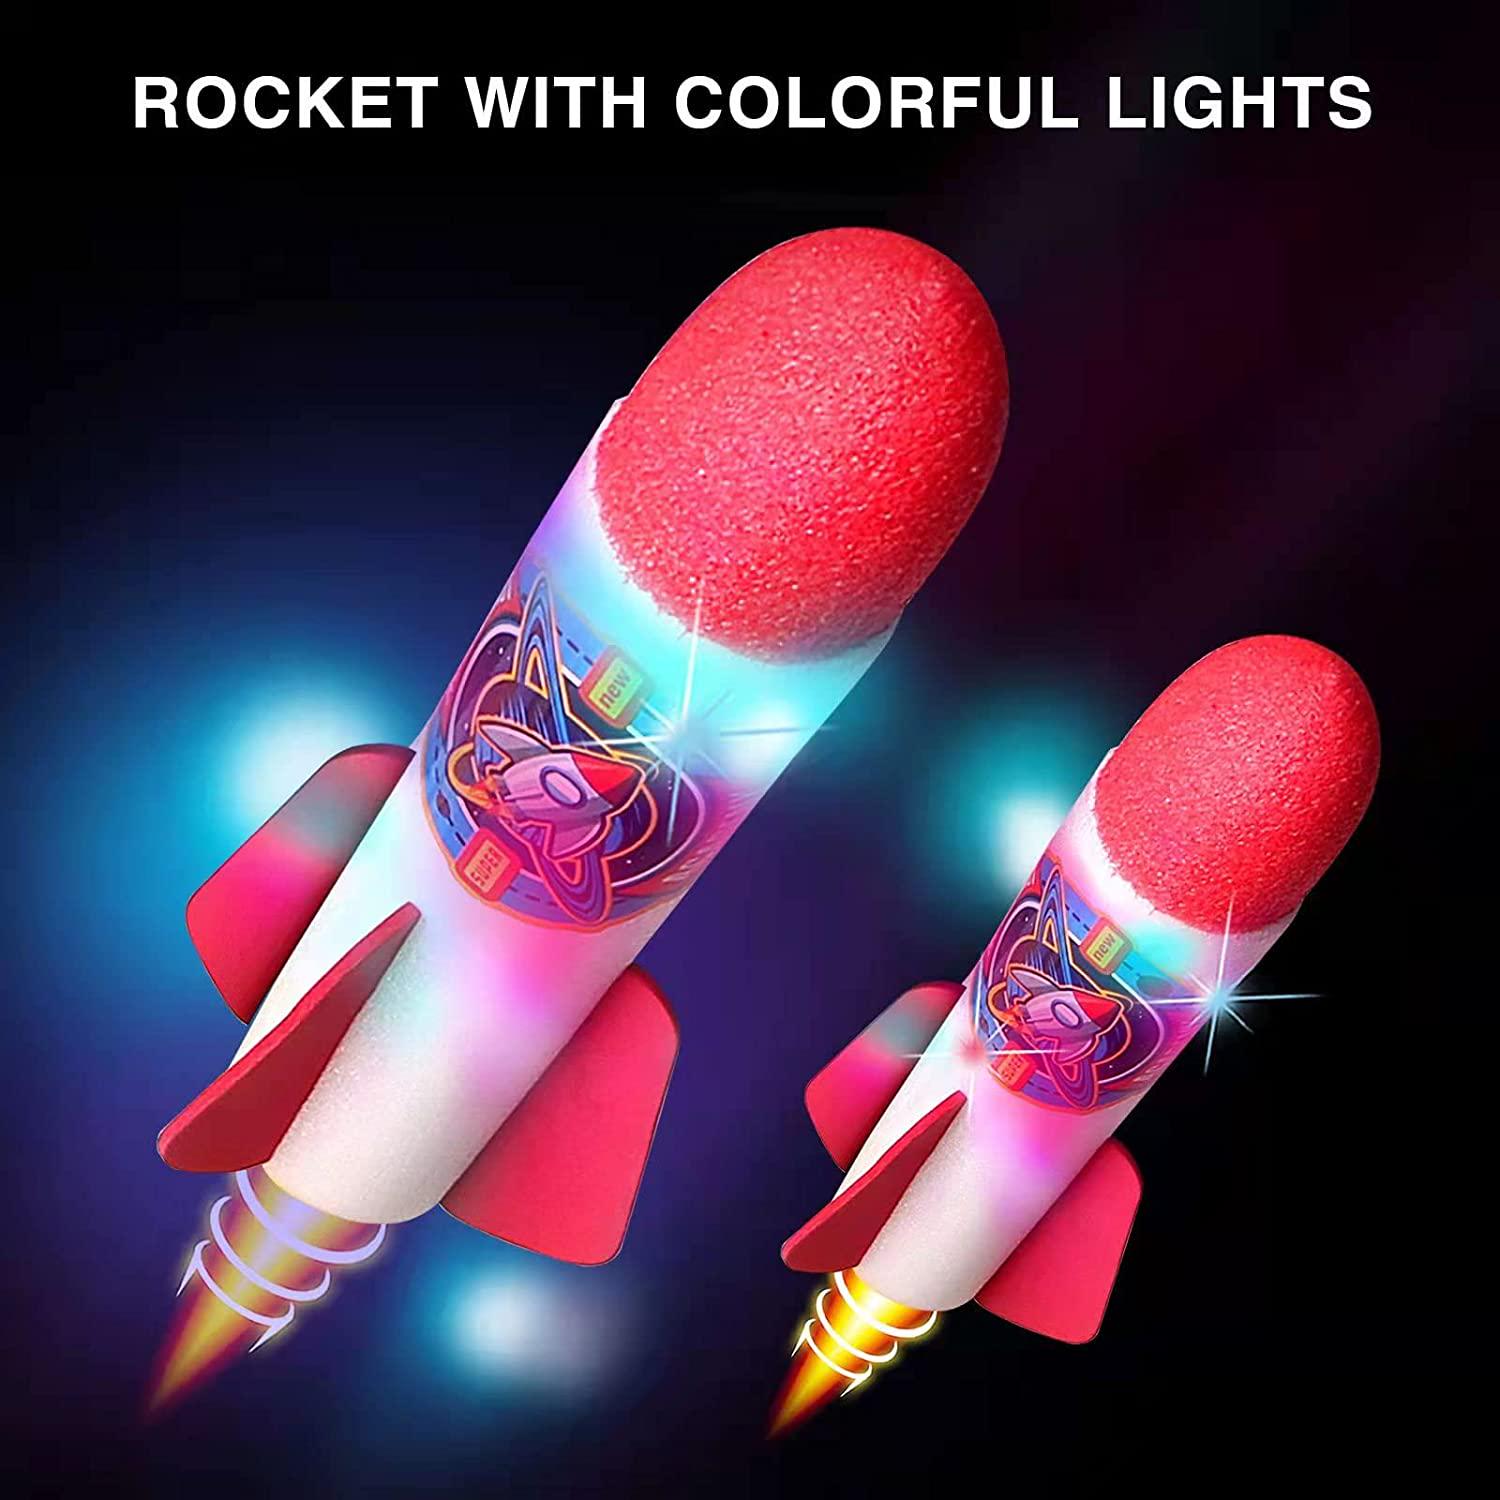 GIGIPIG, GIGIPIG Toy Rocket Launcher for Kids, Stomp Toy Rocket with 6 LED Foam Rockets 2 Launchers Air Rocket Launcher for Kids Shoot Up to 100 Feet Dueling Outdoor Toys for Boys Girls